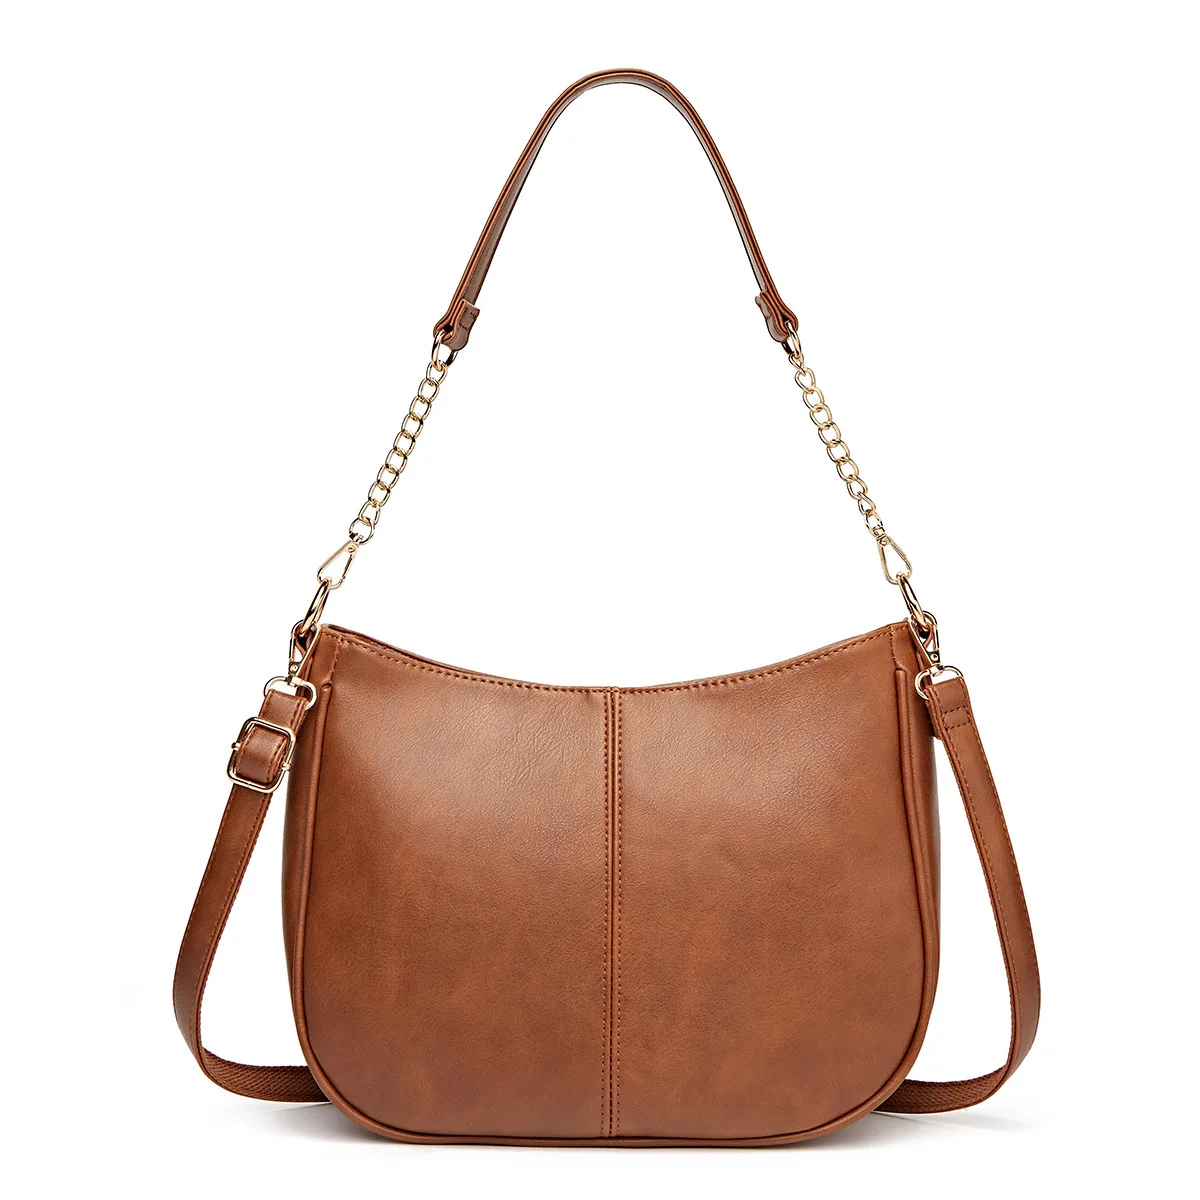 New Women's Simple and Fashionable Handbag, European and American Trend Shopping Travel Diagonal Straddle Shoulder Bag